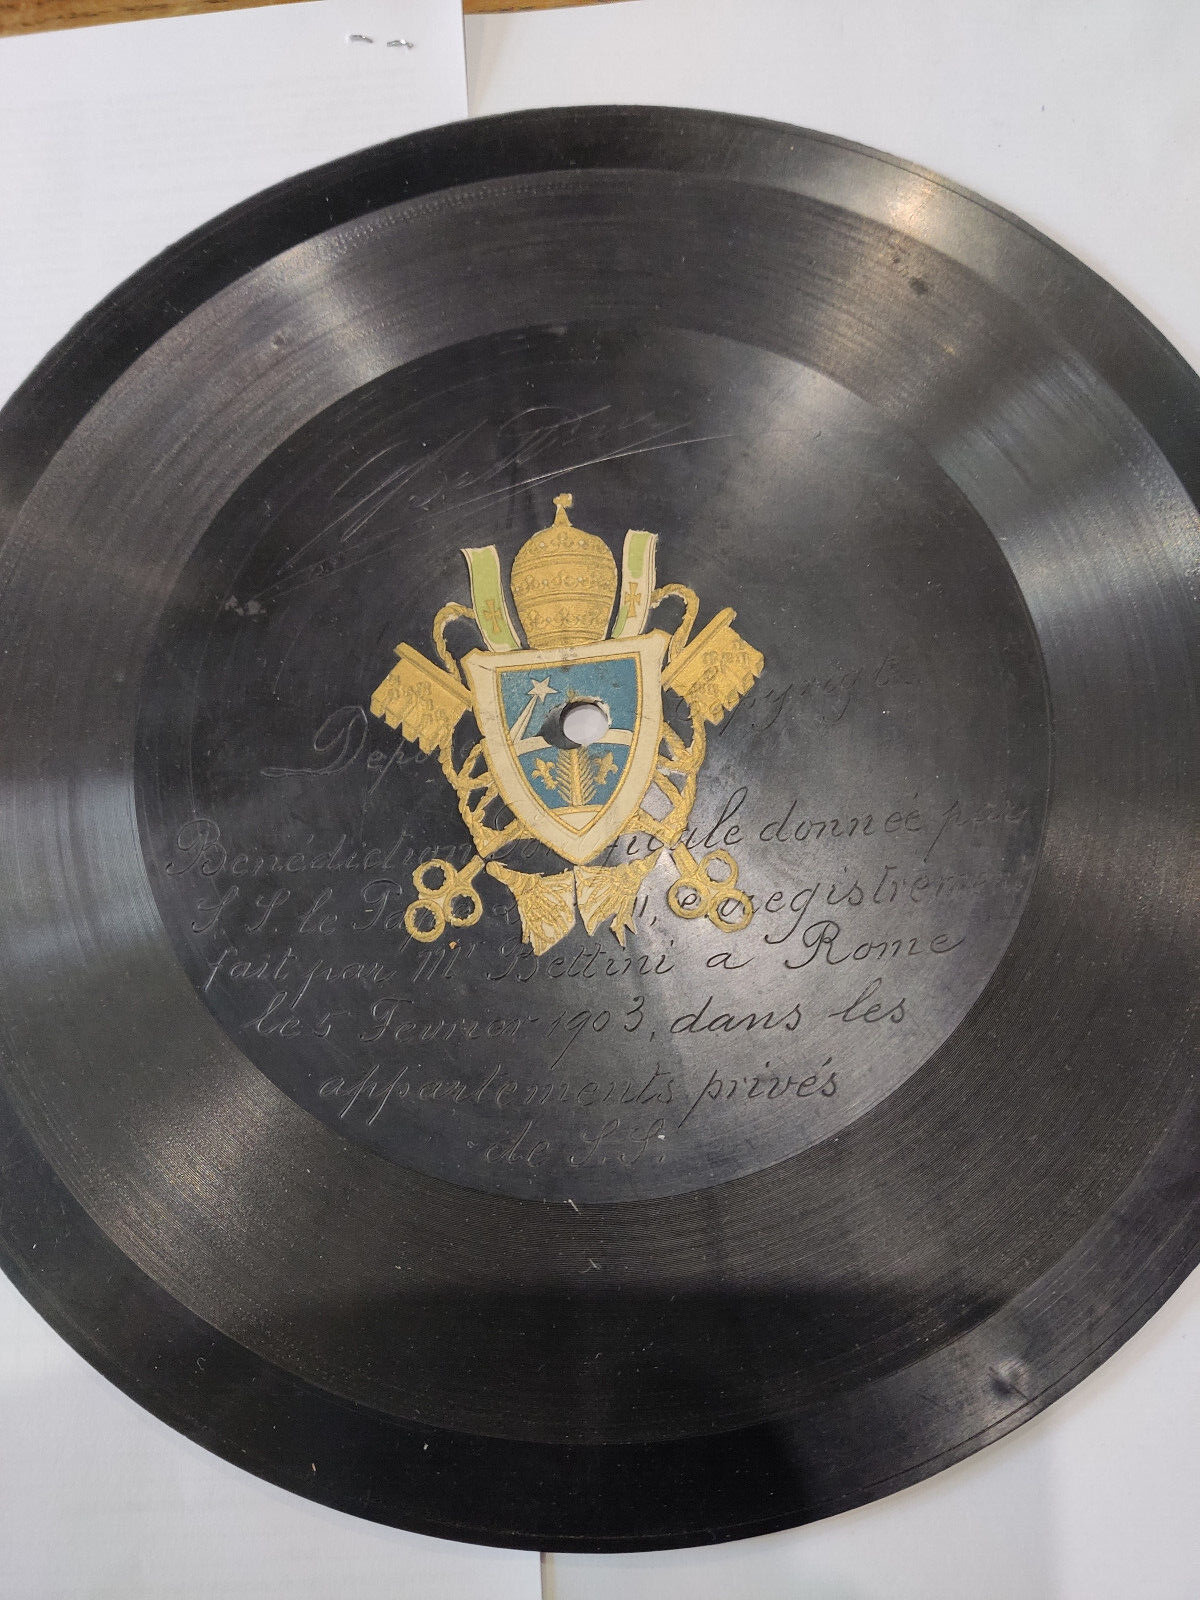 very rare Bettini record Pope recording 1903 signed and engraved Bettini